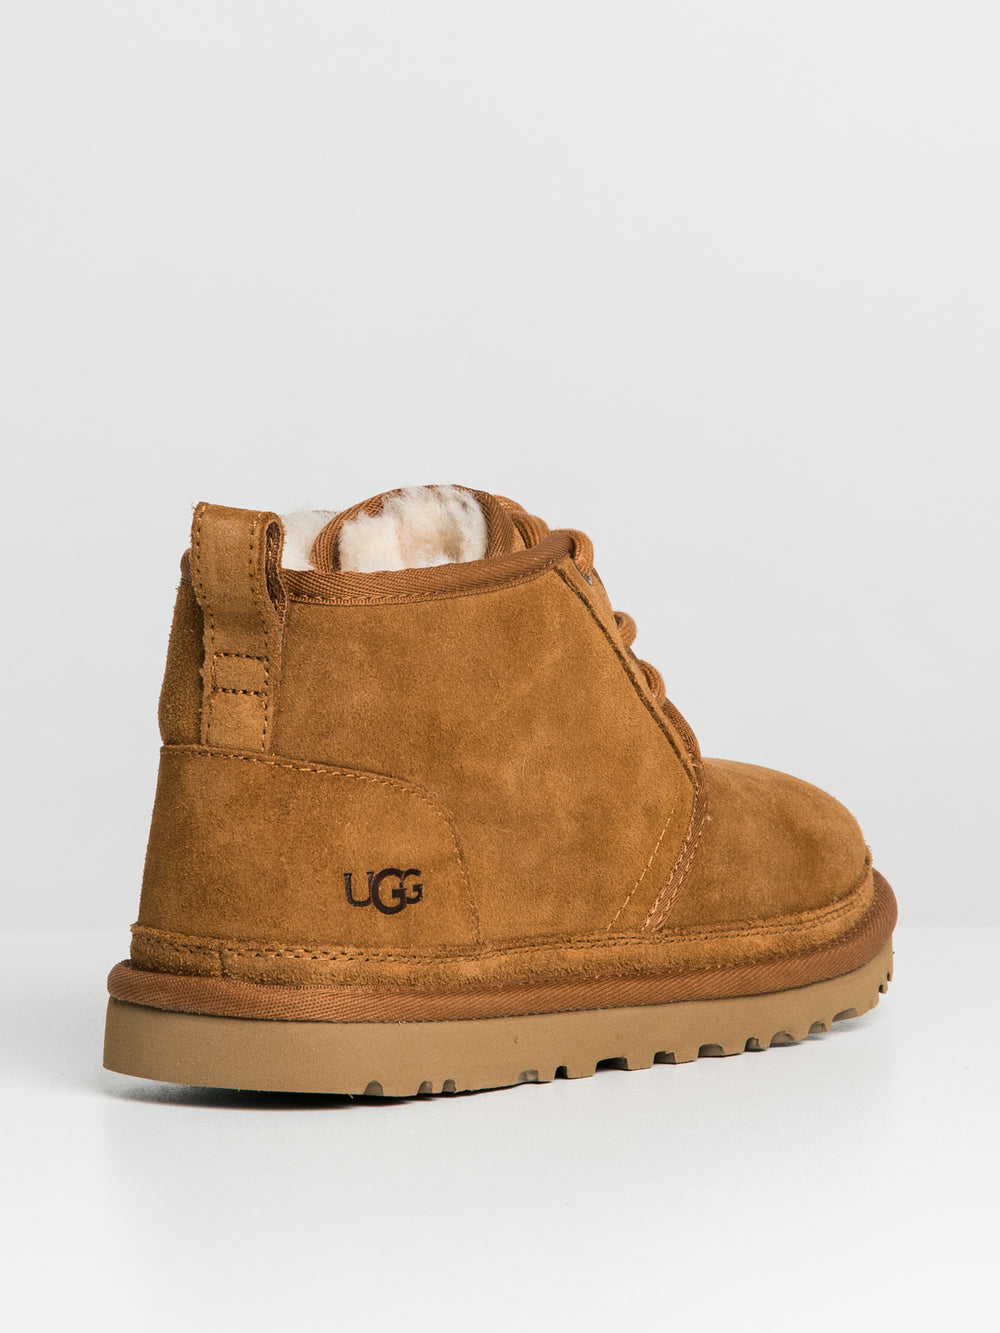 UGG Women's Neumel Boot Authentic and Original Box Style 1094269